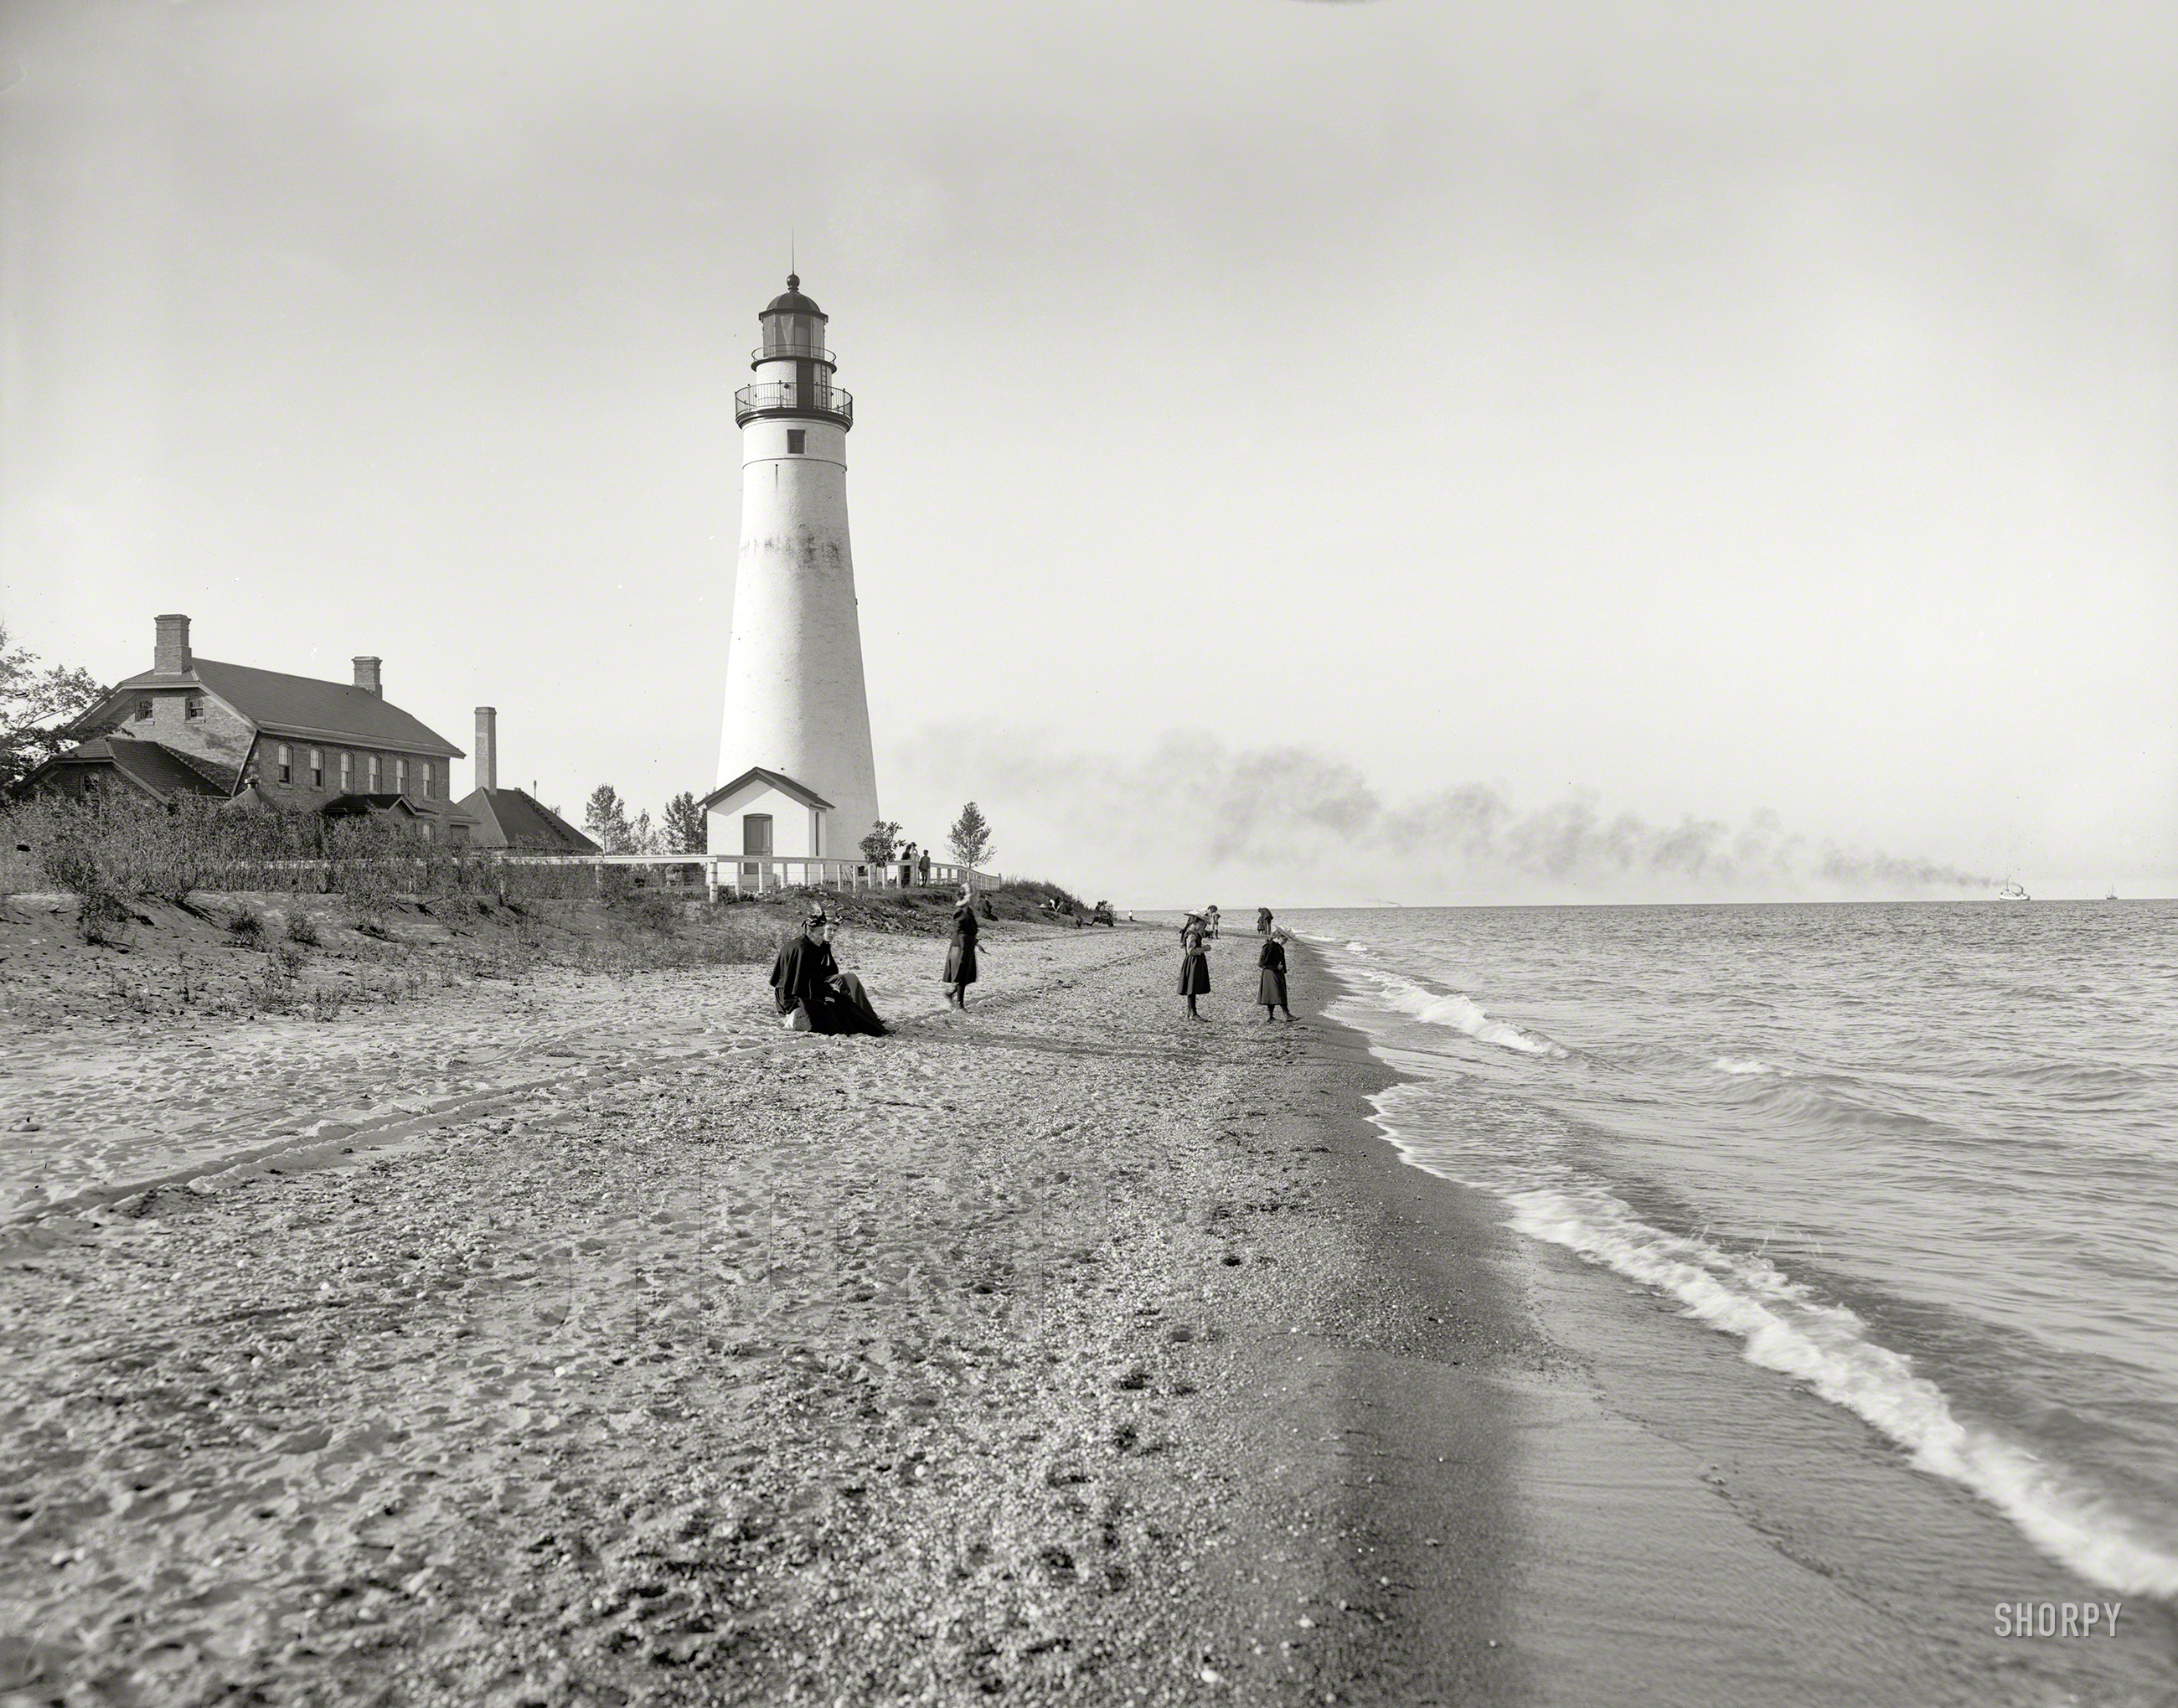 Circa 1901. "Gratiot Light, Port Huron, Michigan." A great lighthouse on a Great Lake! 8x10 inch glass negative, Detroit Publishing Company. View full size.